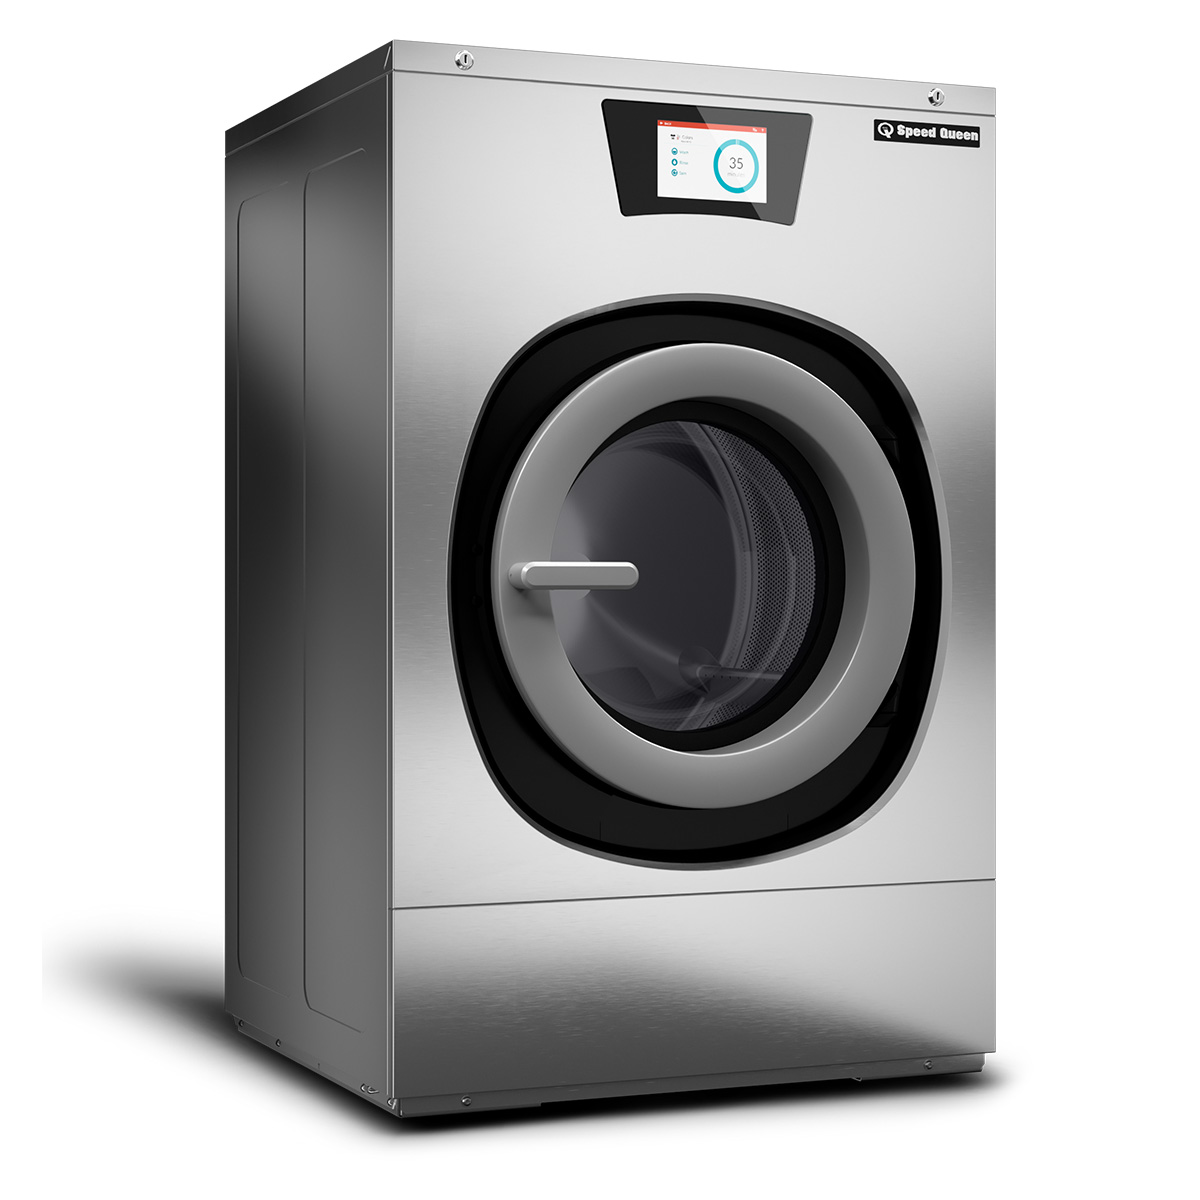 Speed Queen Washers and Dryers - The little known brand that is built to  last decades - DIY Investing